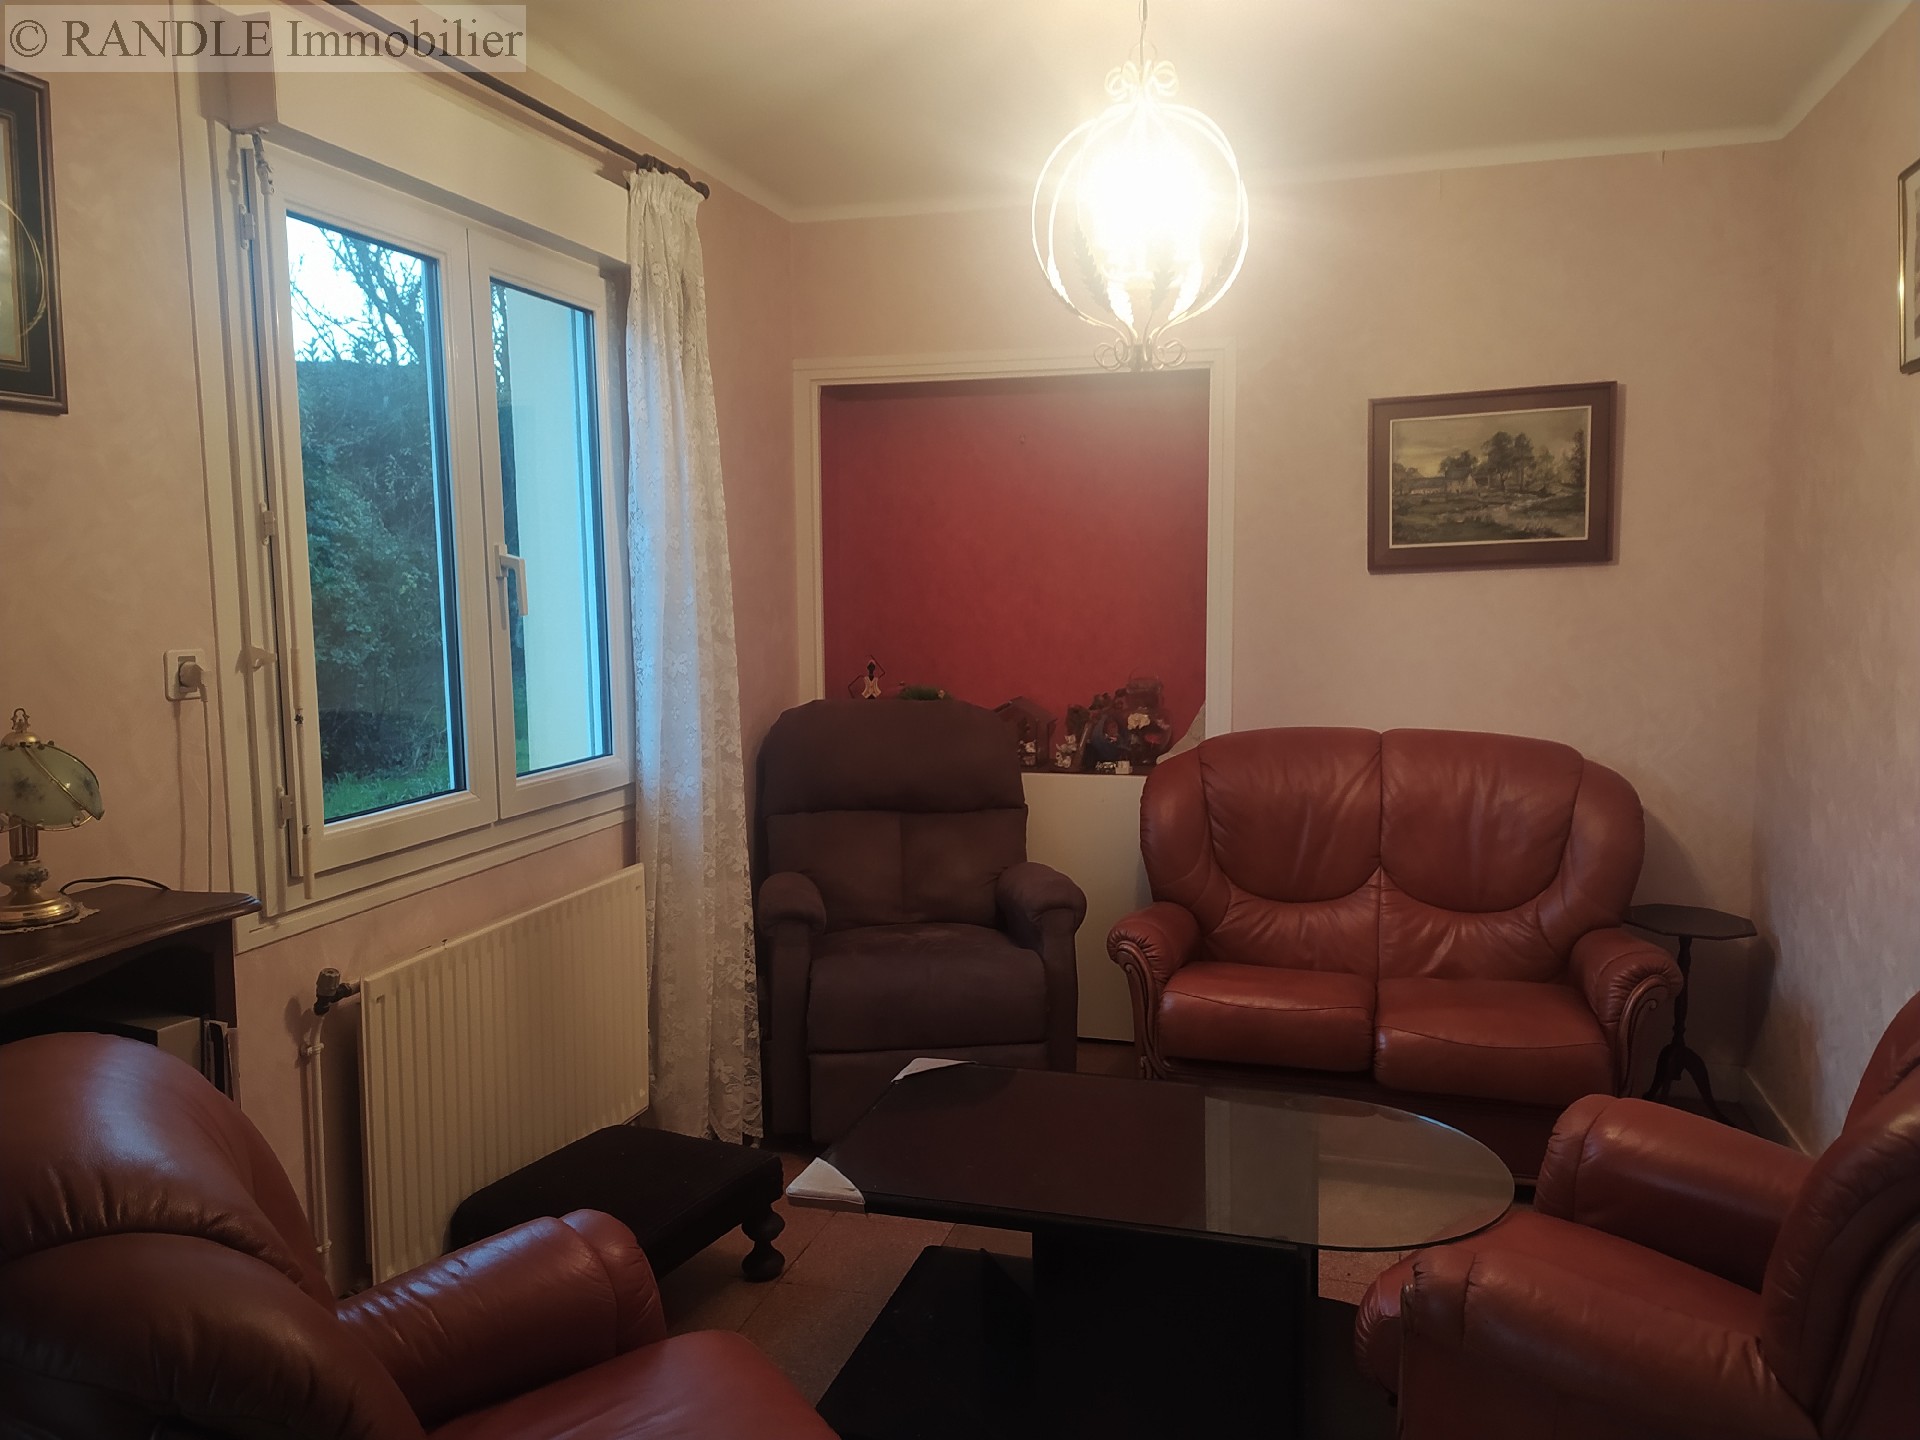 Sell city house - BANNALEC 103 m², 5 rooms